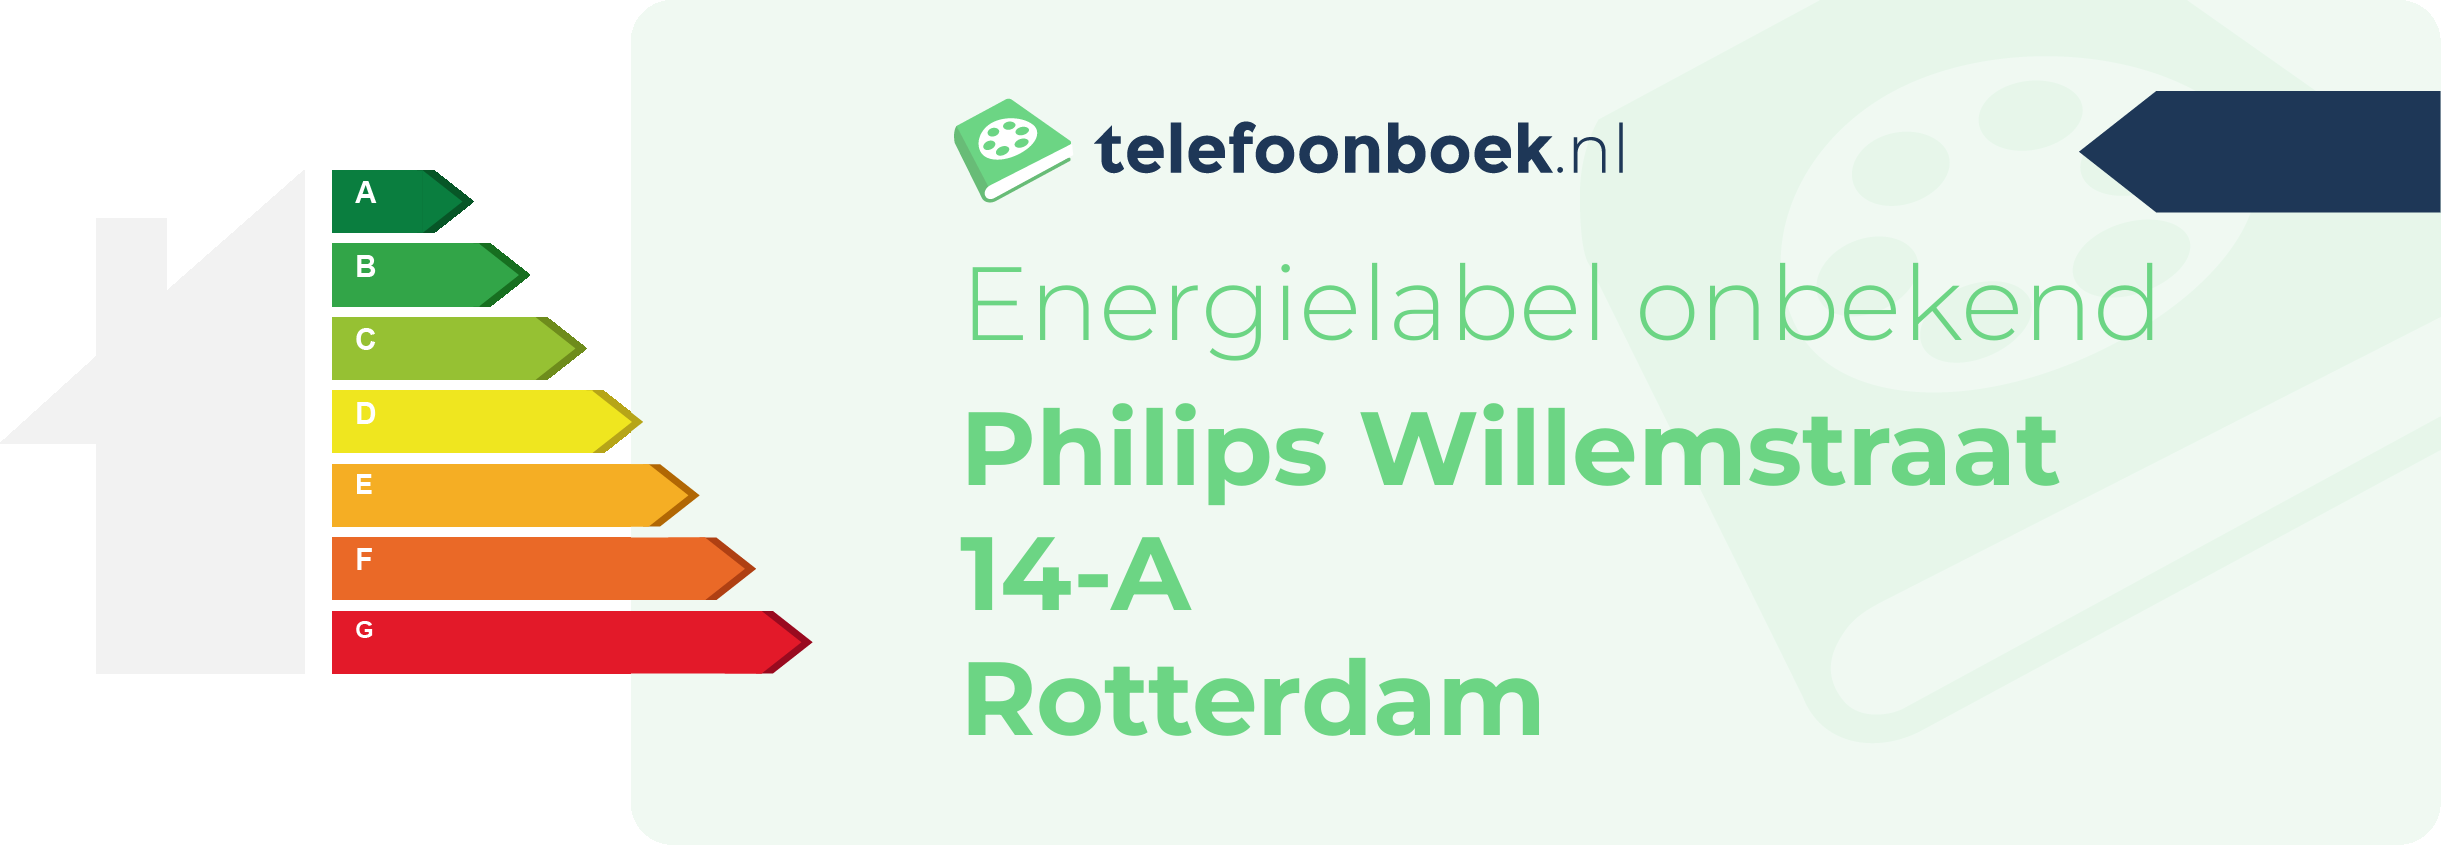 Energielabel Philips Willemstraat 14-A Rotterdam